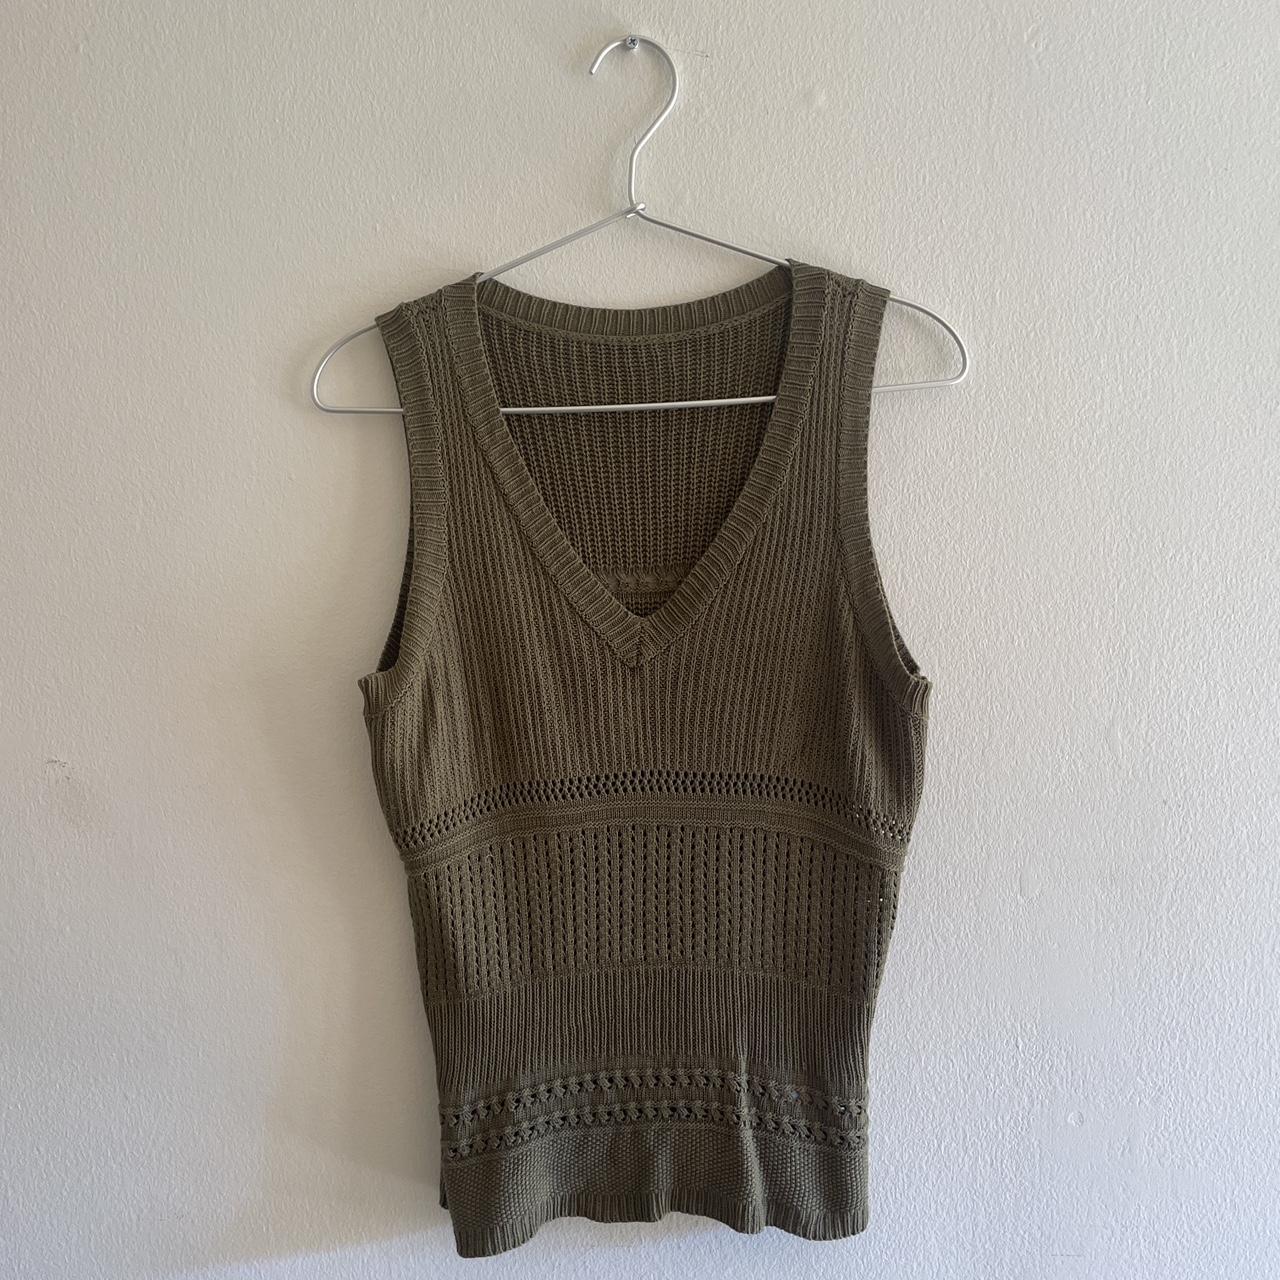 Sage green knit vest Light weight, perfect for... - Depop